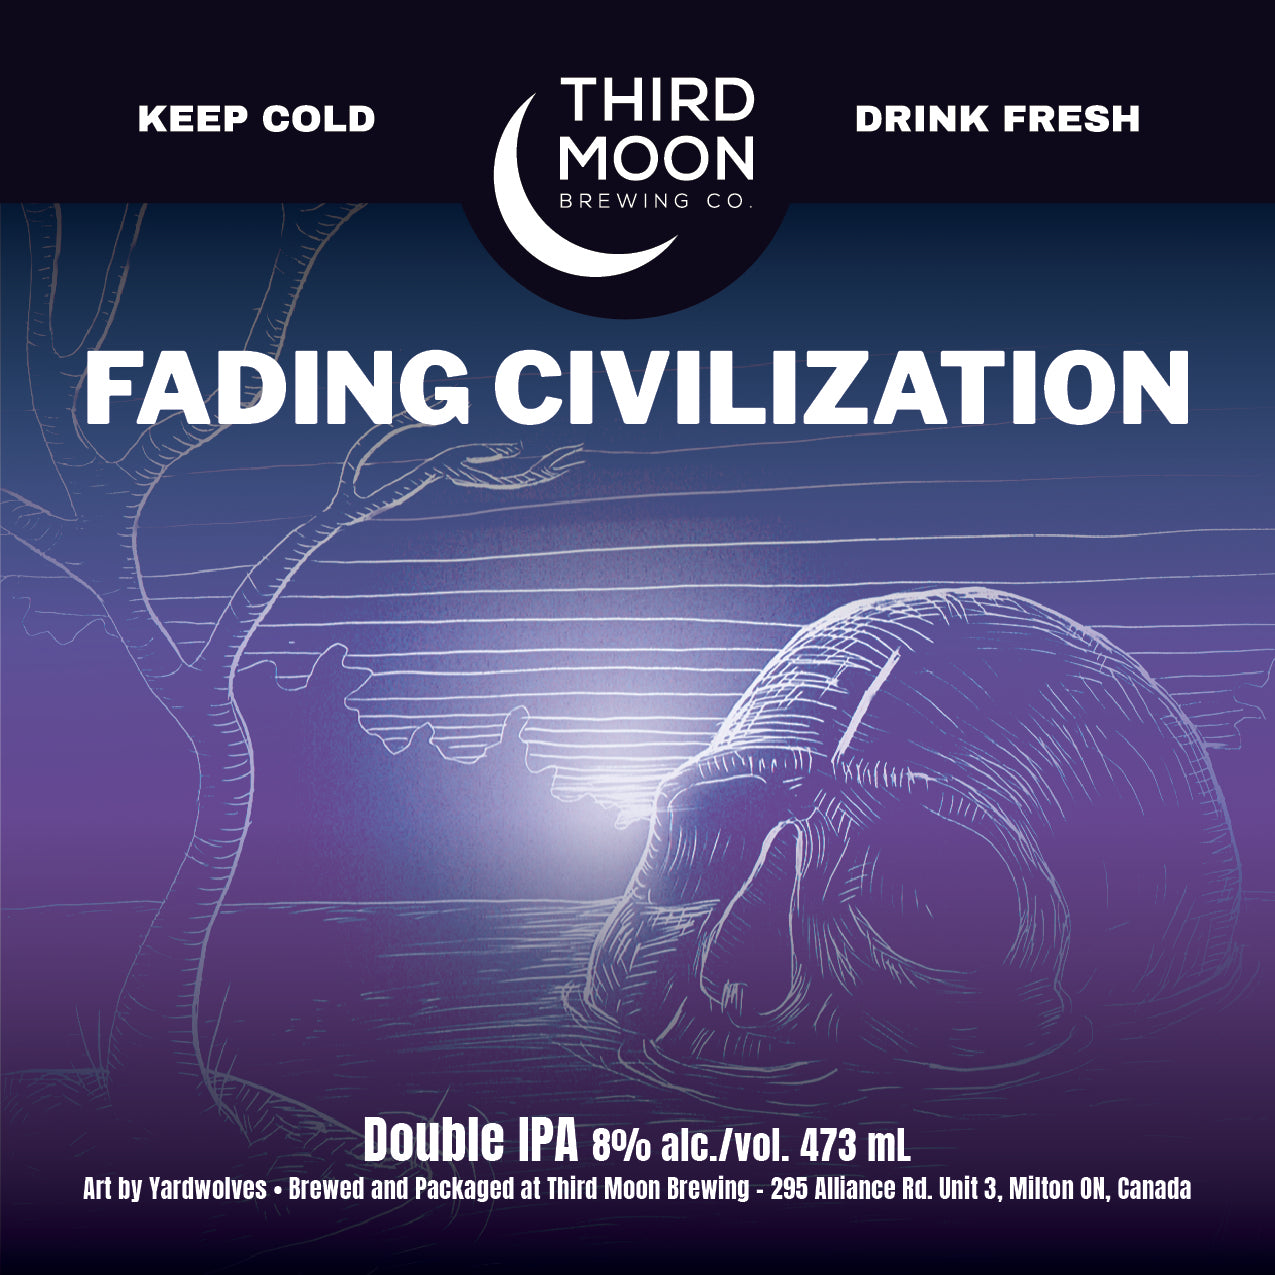 Double IPA - 4-pk of "Fading Civilization" tall cans